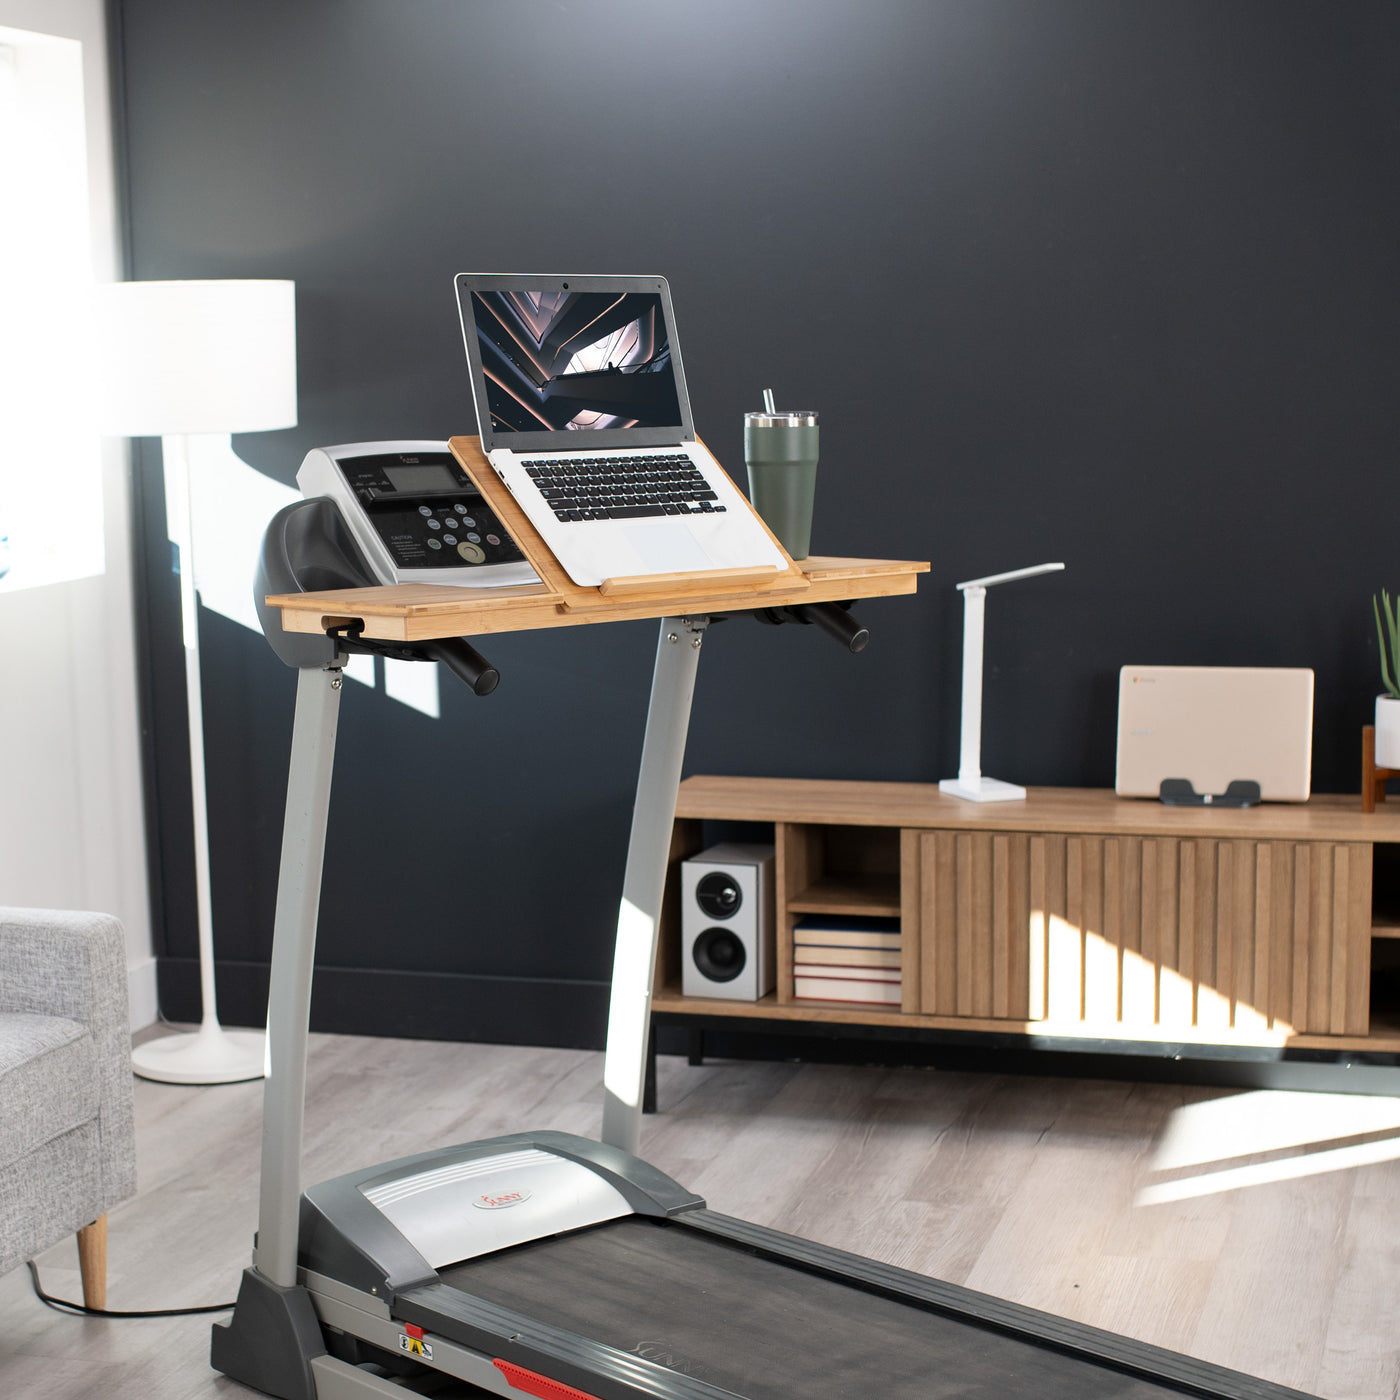 Bamboo tilting laptop desk for treadmill with heavy duty side shelves and easy installation.